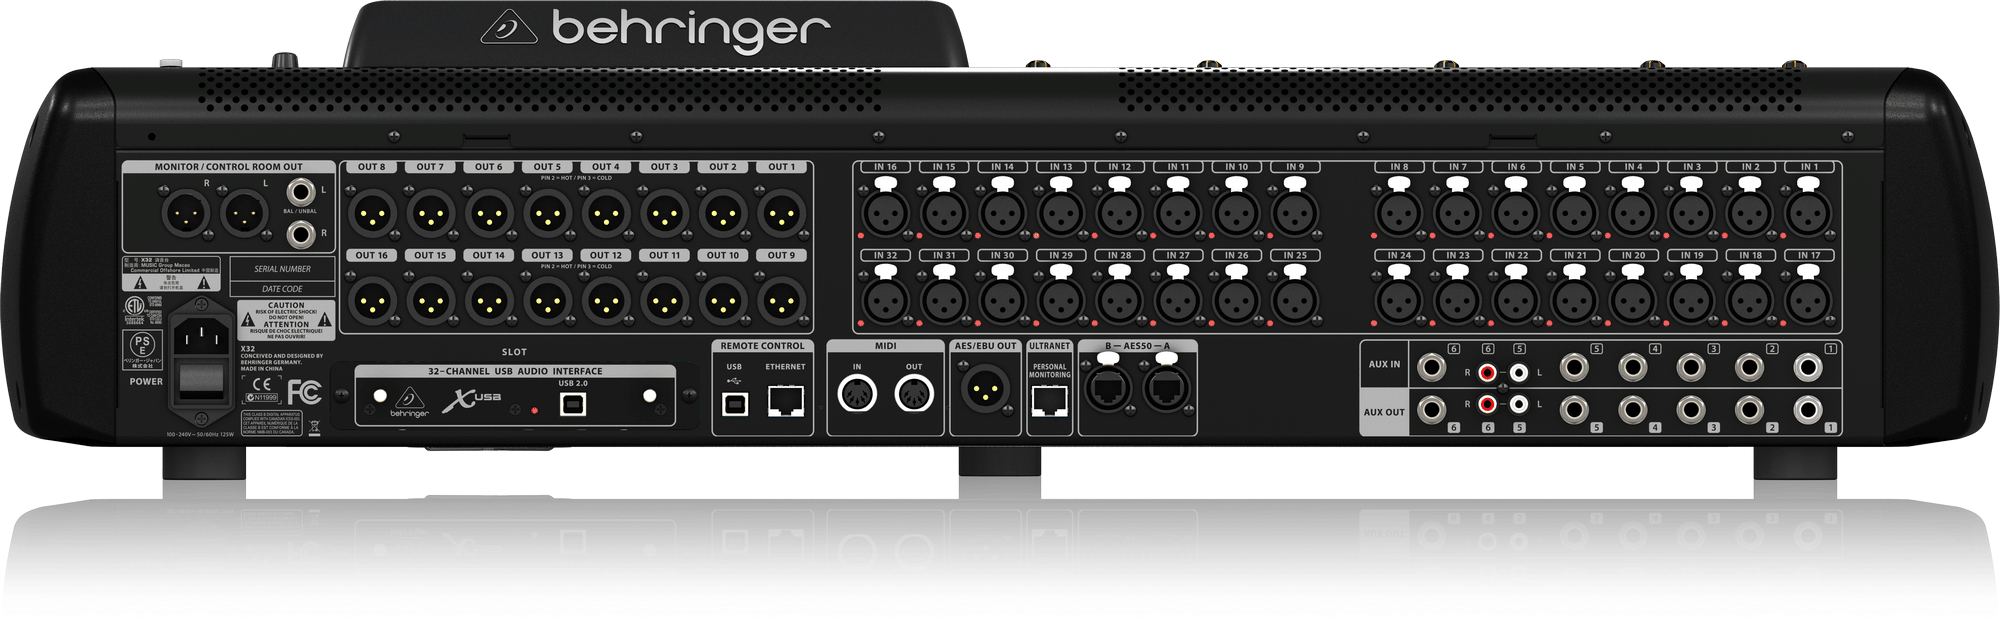 behringer x32 output factory settings